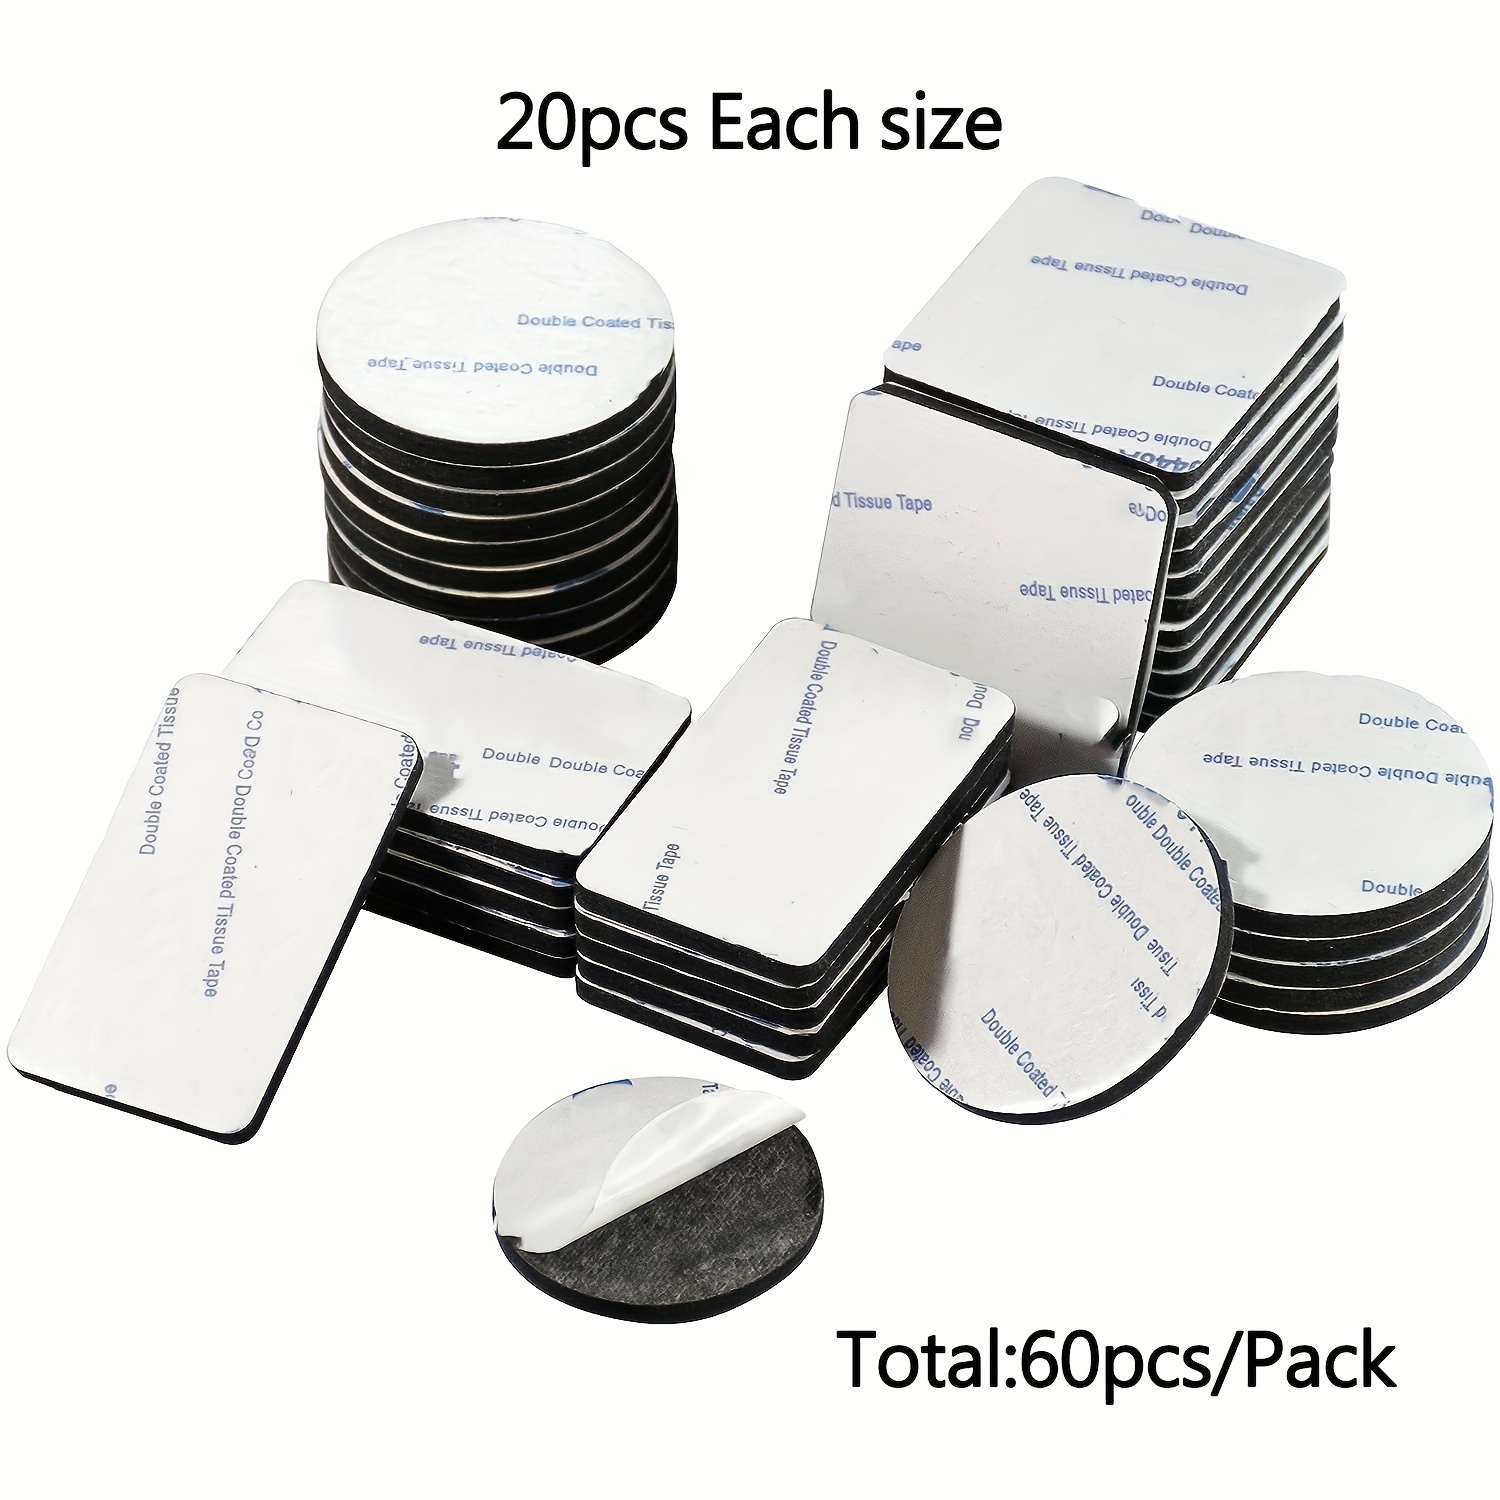 100 Pieces 3M Square Double Sided Foam Tape Strong Pads,27 x 27 Sticky Pad Mounting Adhesive Tape, White